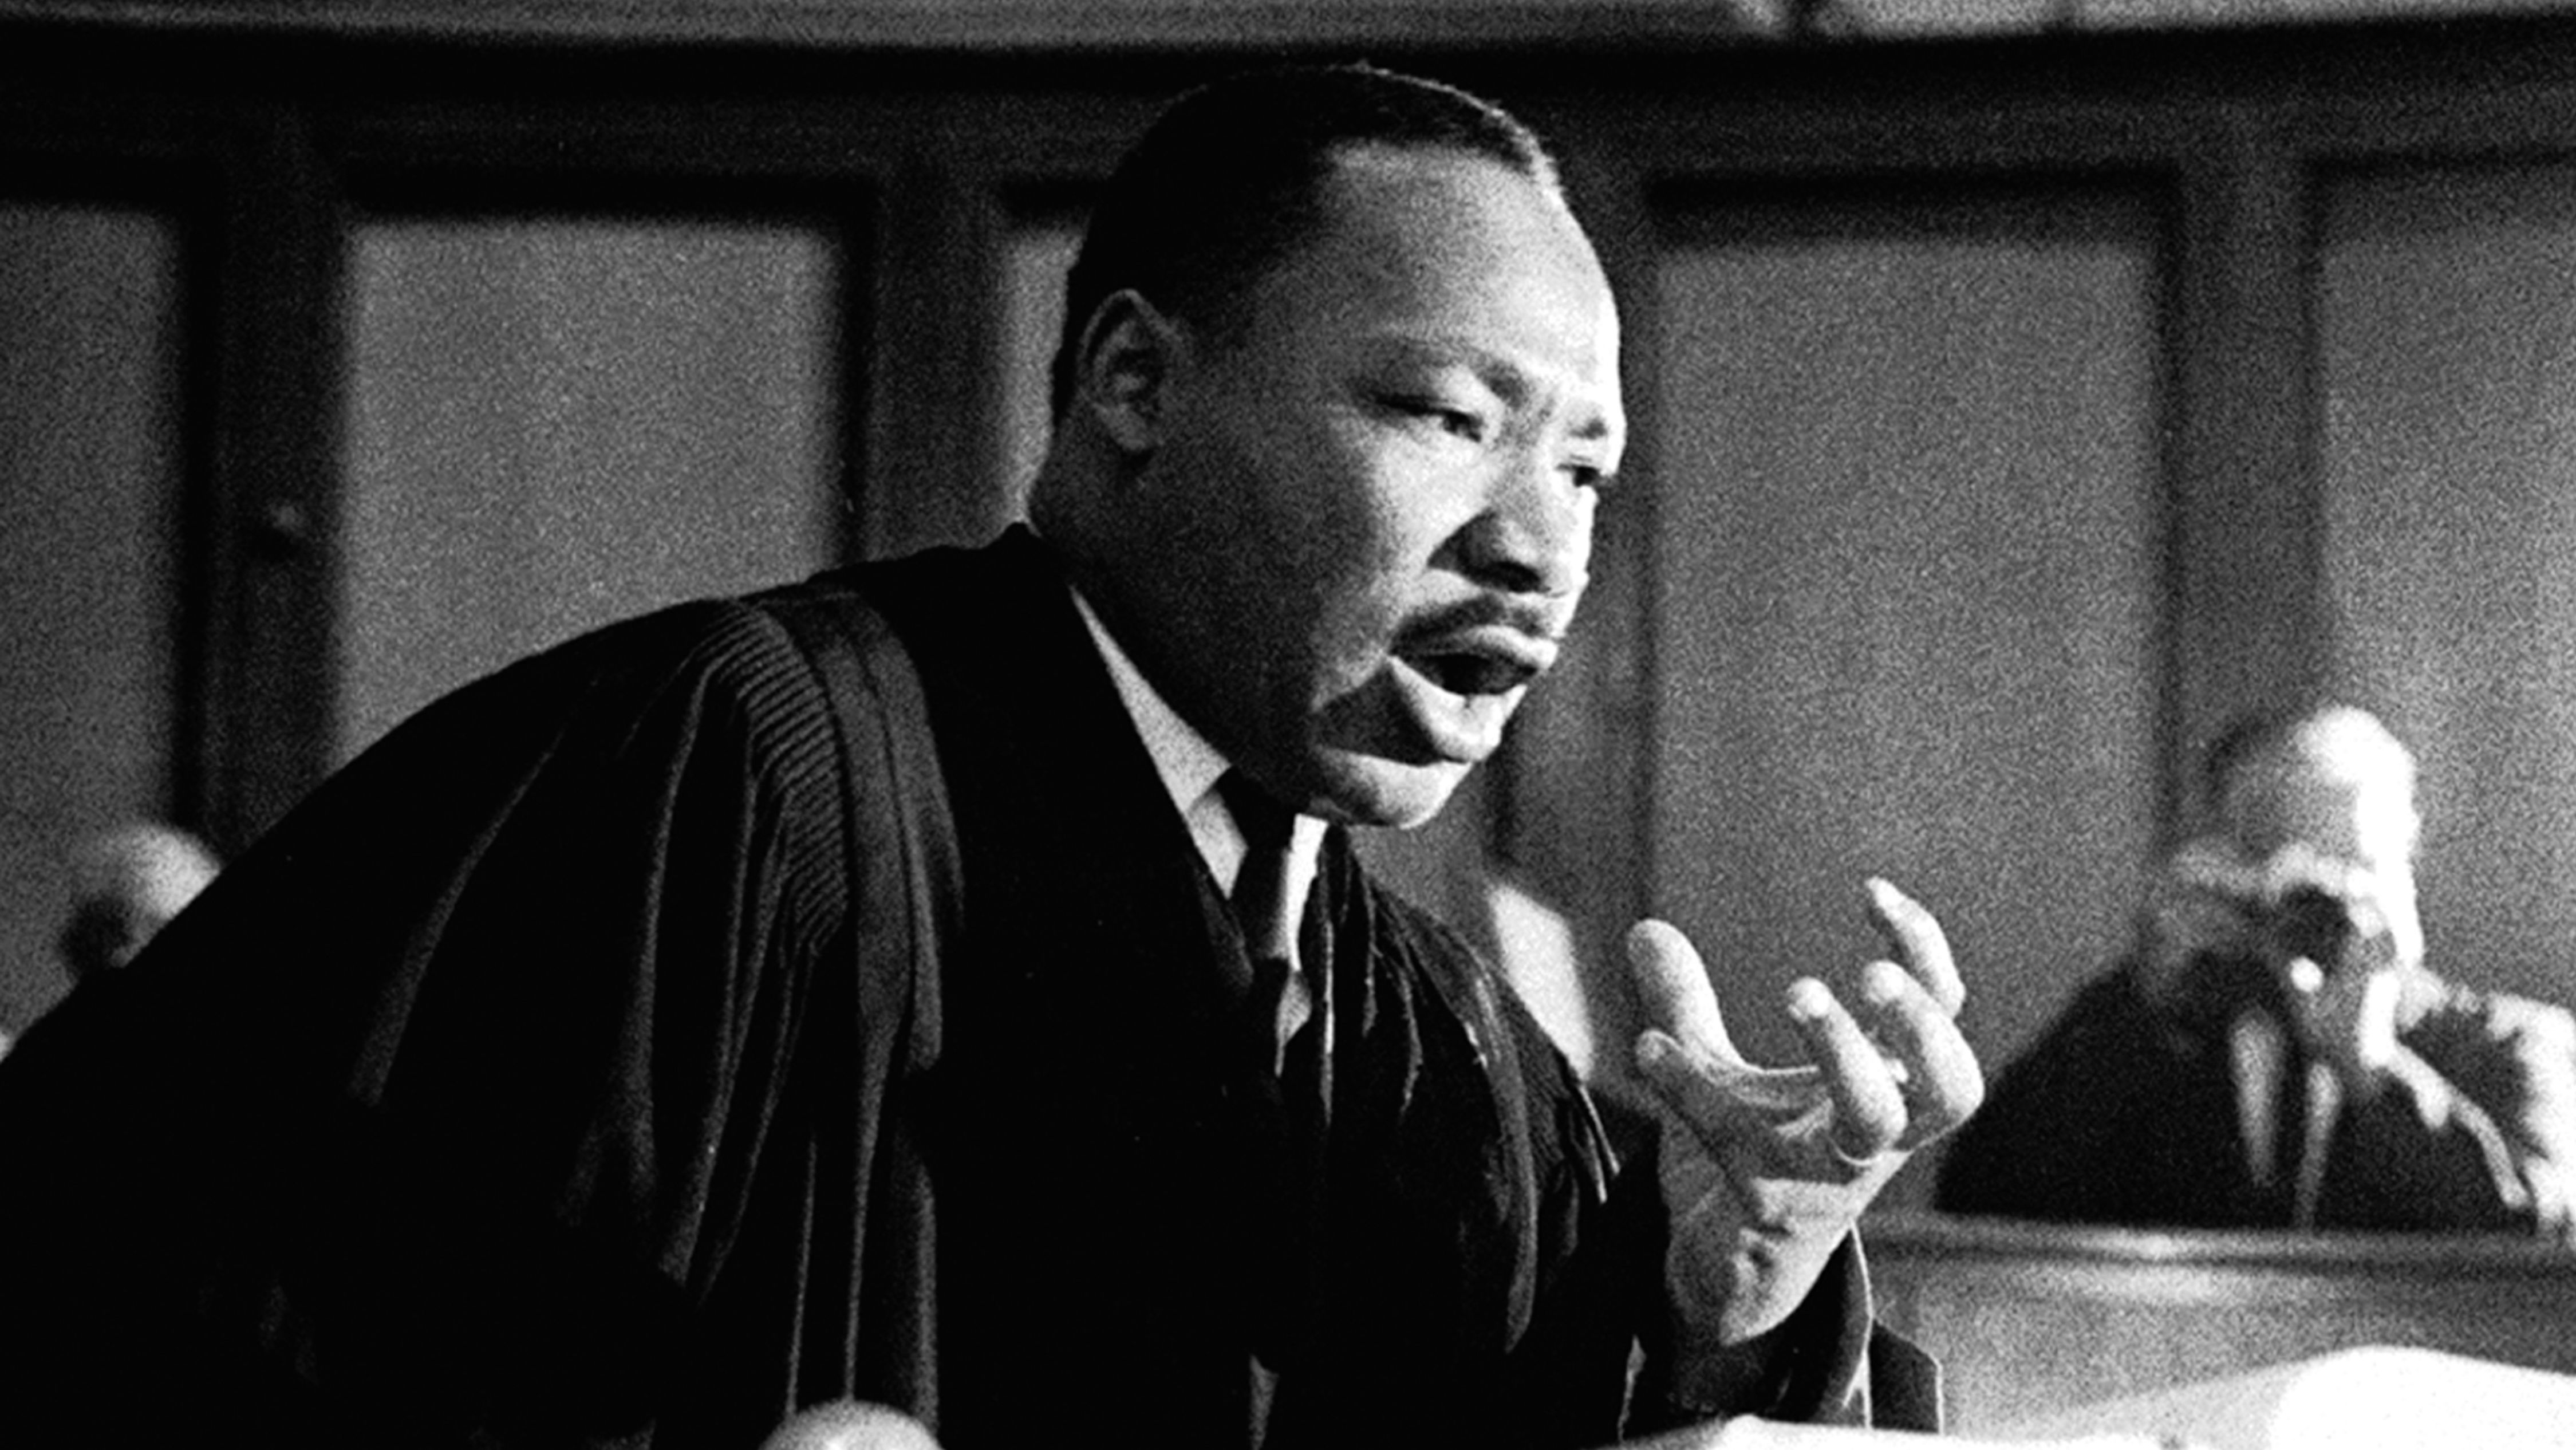 "The world now demands a maturity of America that we may not be able to achieve," Martin Luther King Jr. told a packed audience.